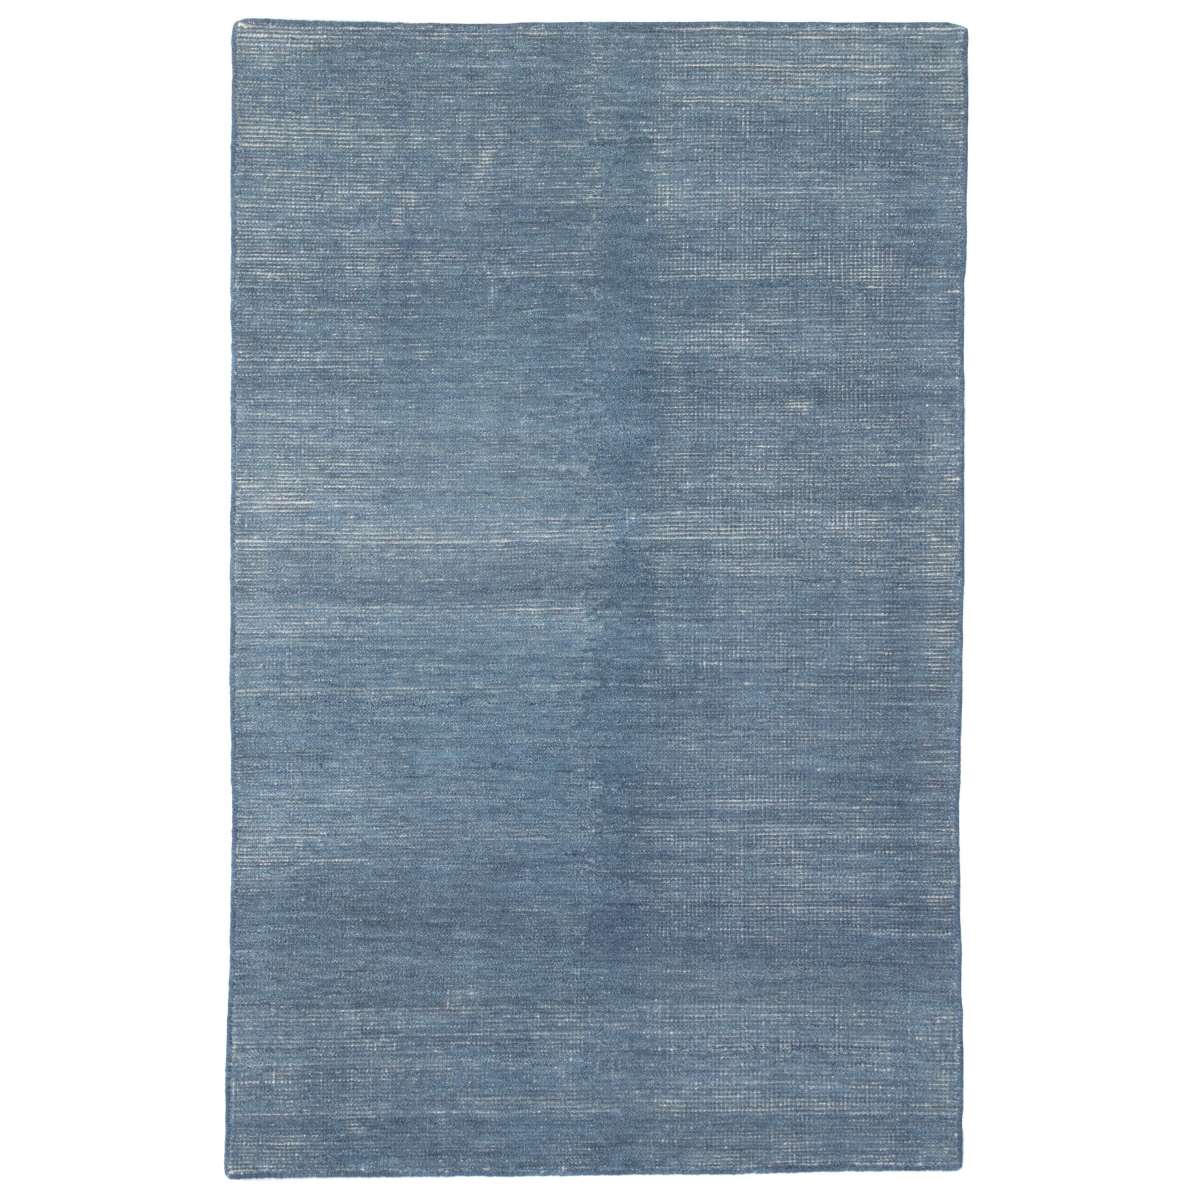 Rug128146 2 X 3 Ft. Paramount Hand-knotted Solid Indigo & White Area Rug